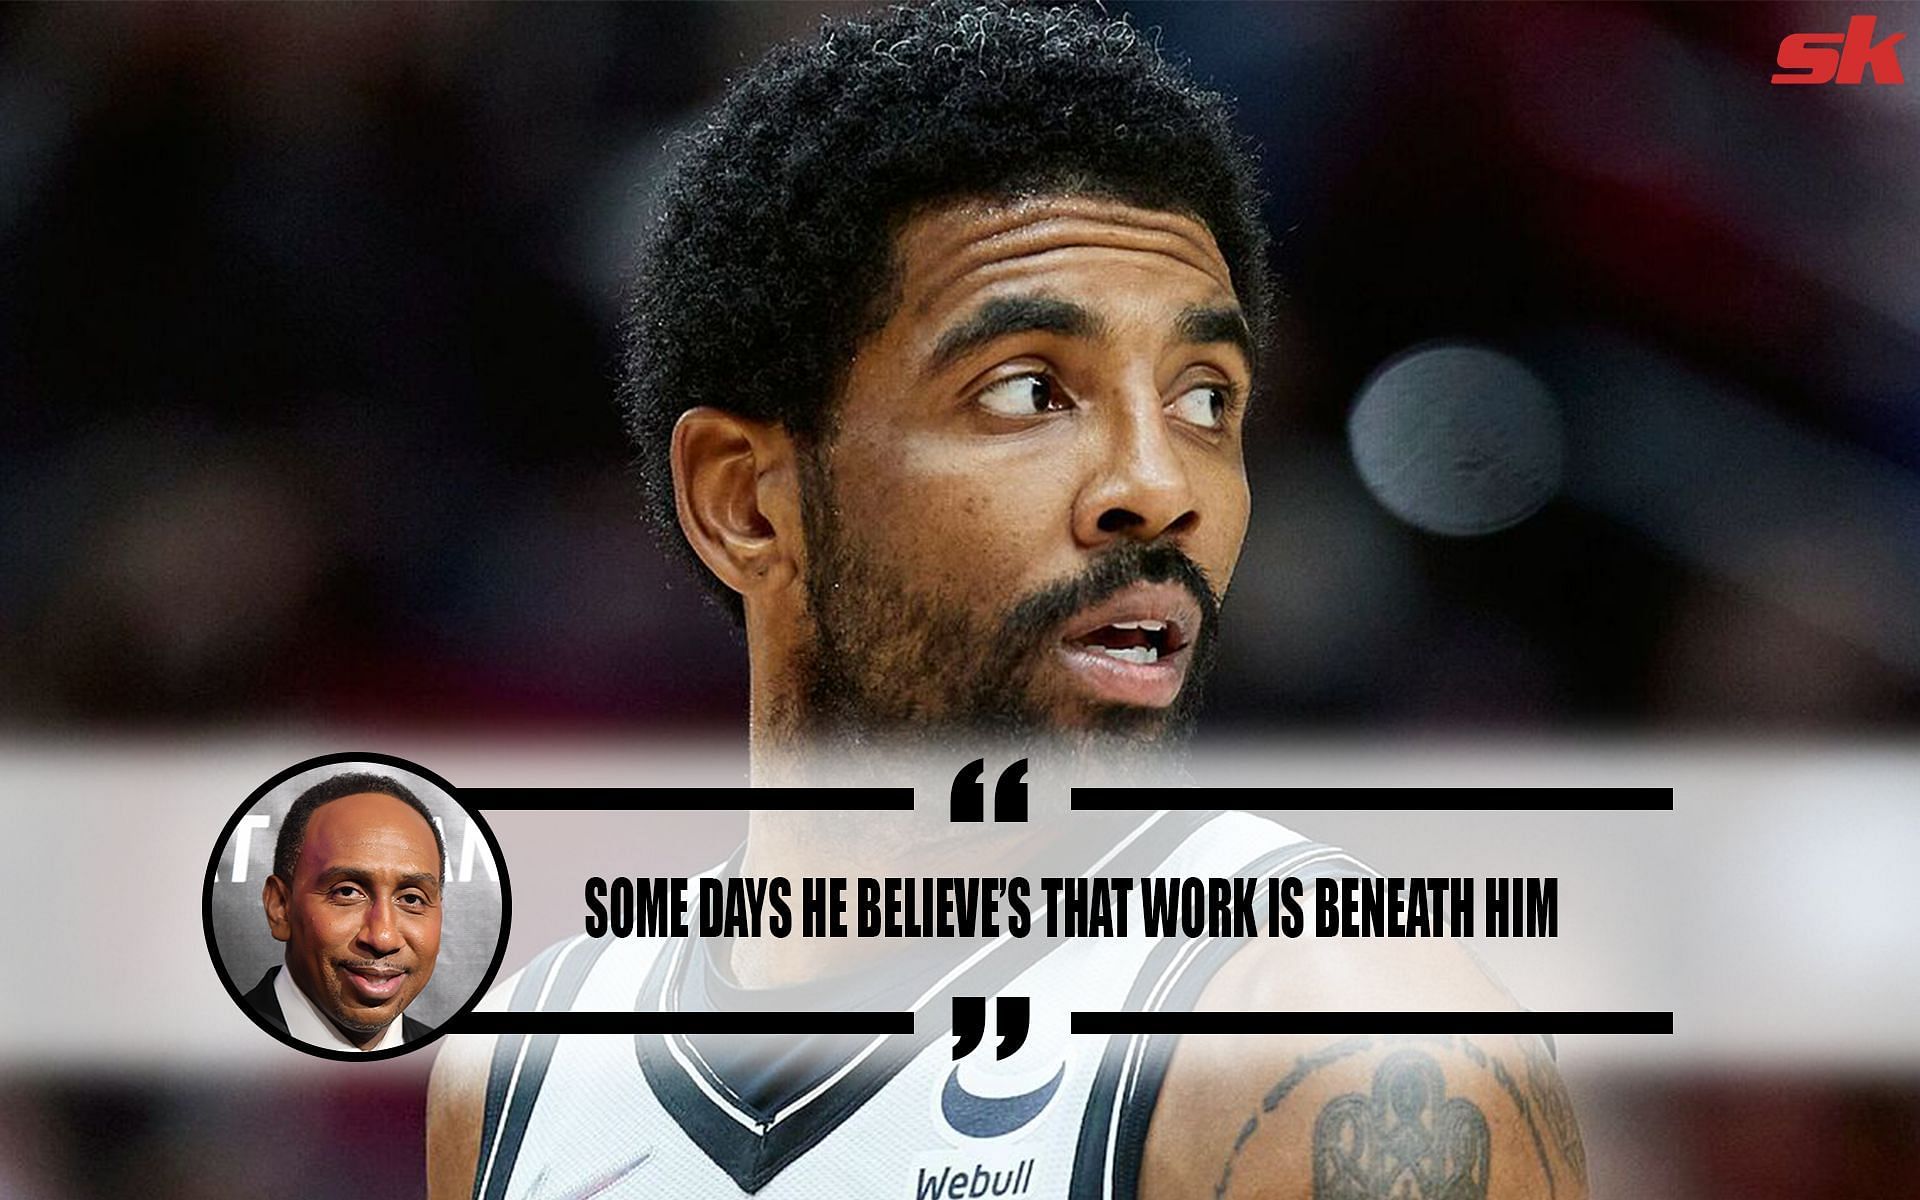 Stephen A Smith believes Kyrie Irving is not reliable.